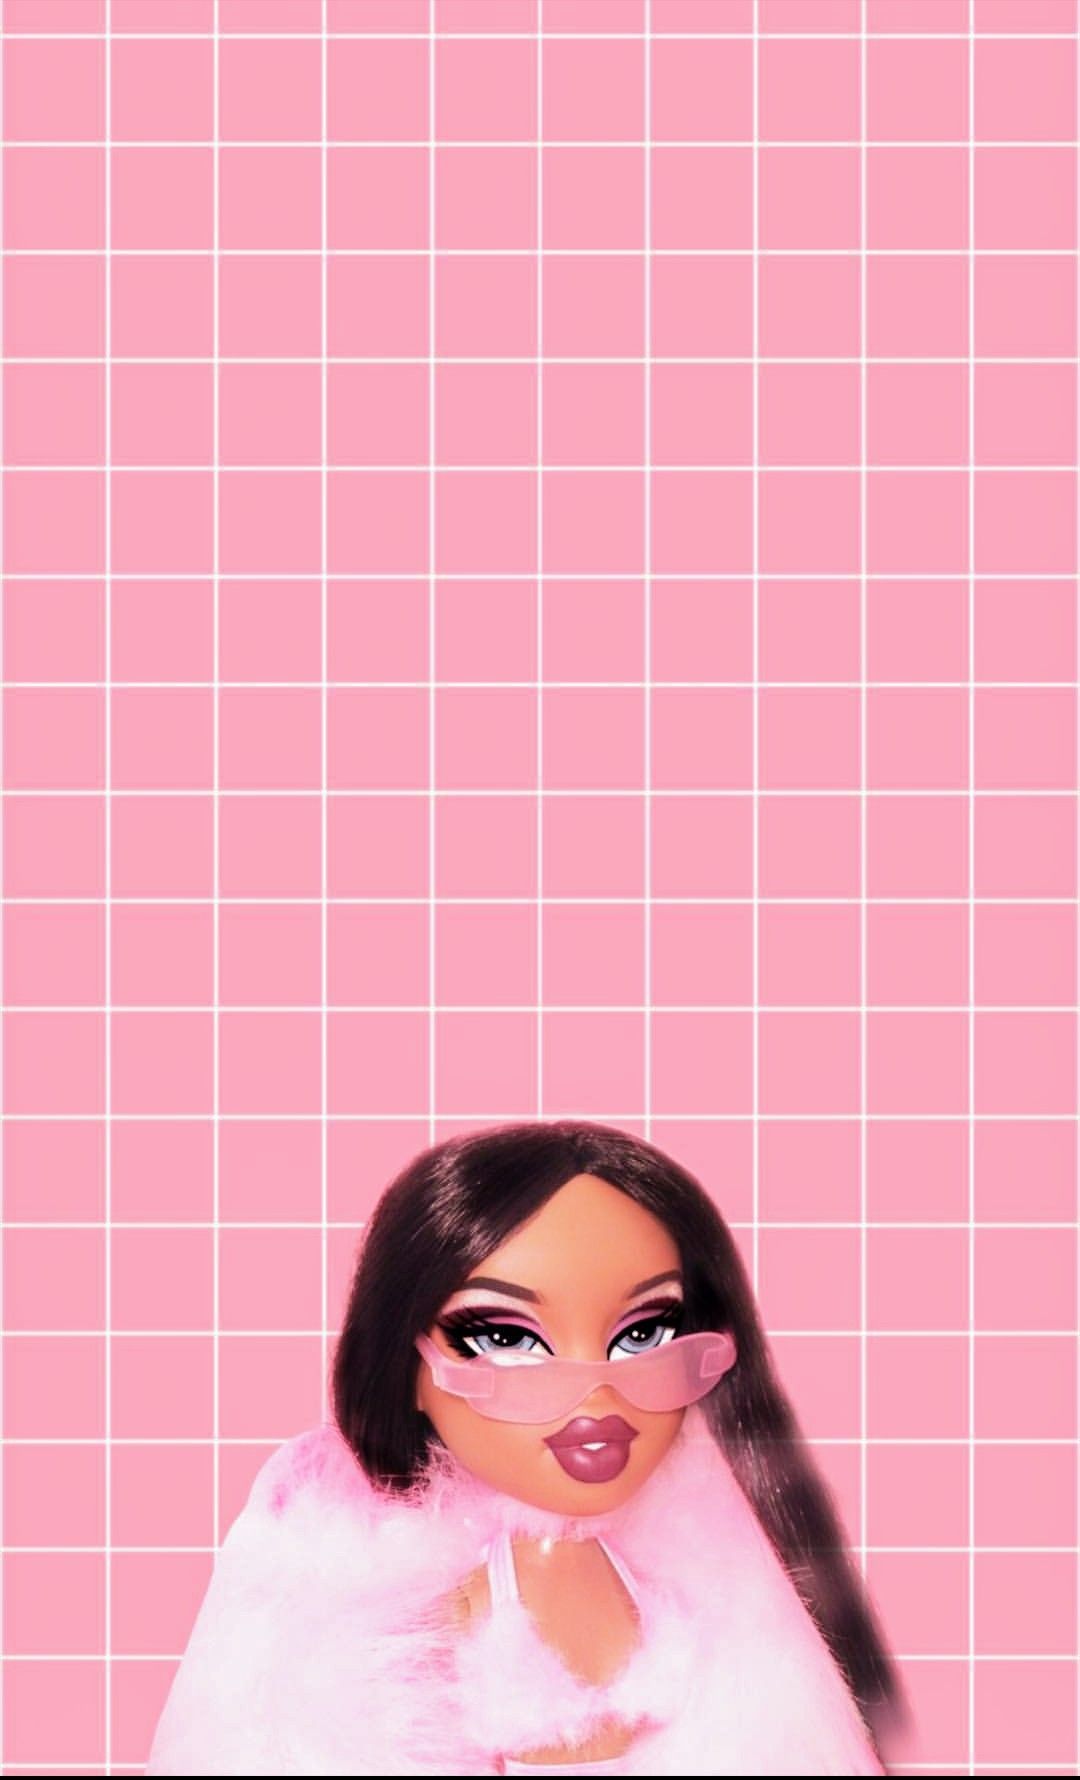 A girl with pink hair and glasses on her face - Bratz, pink, grid